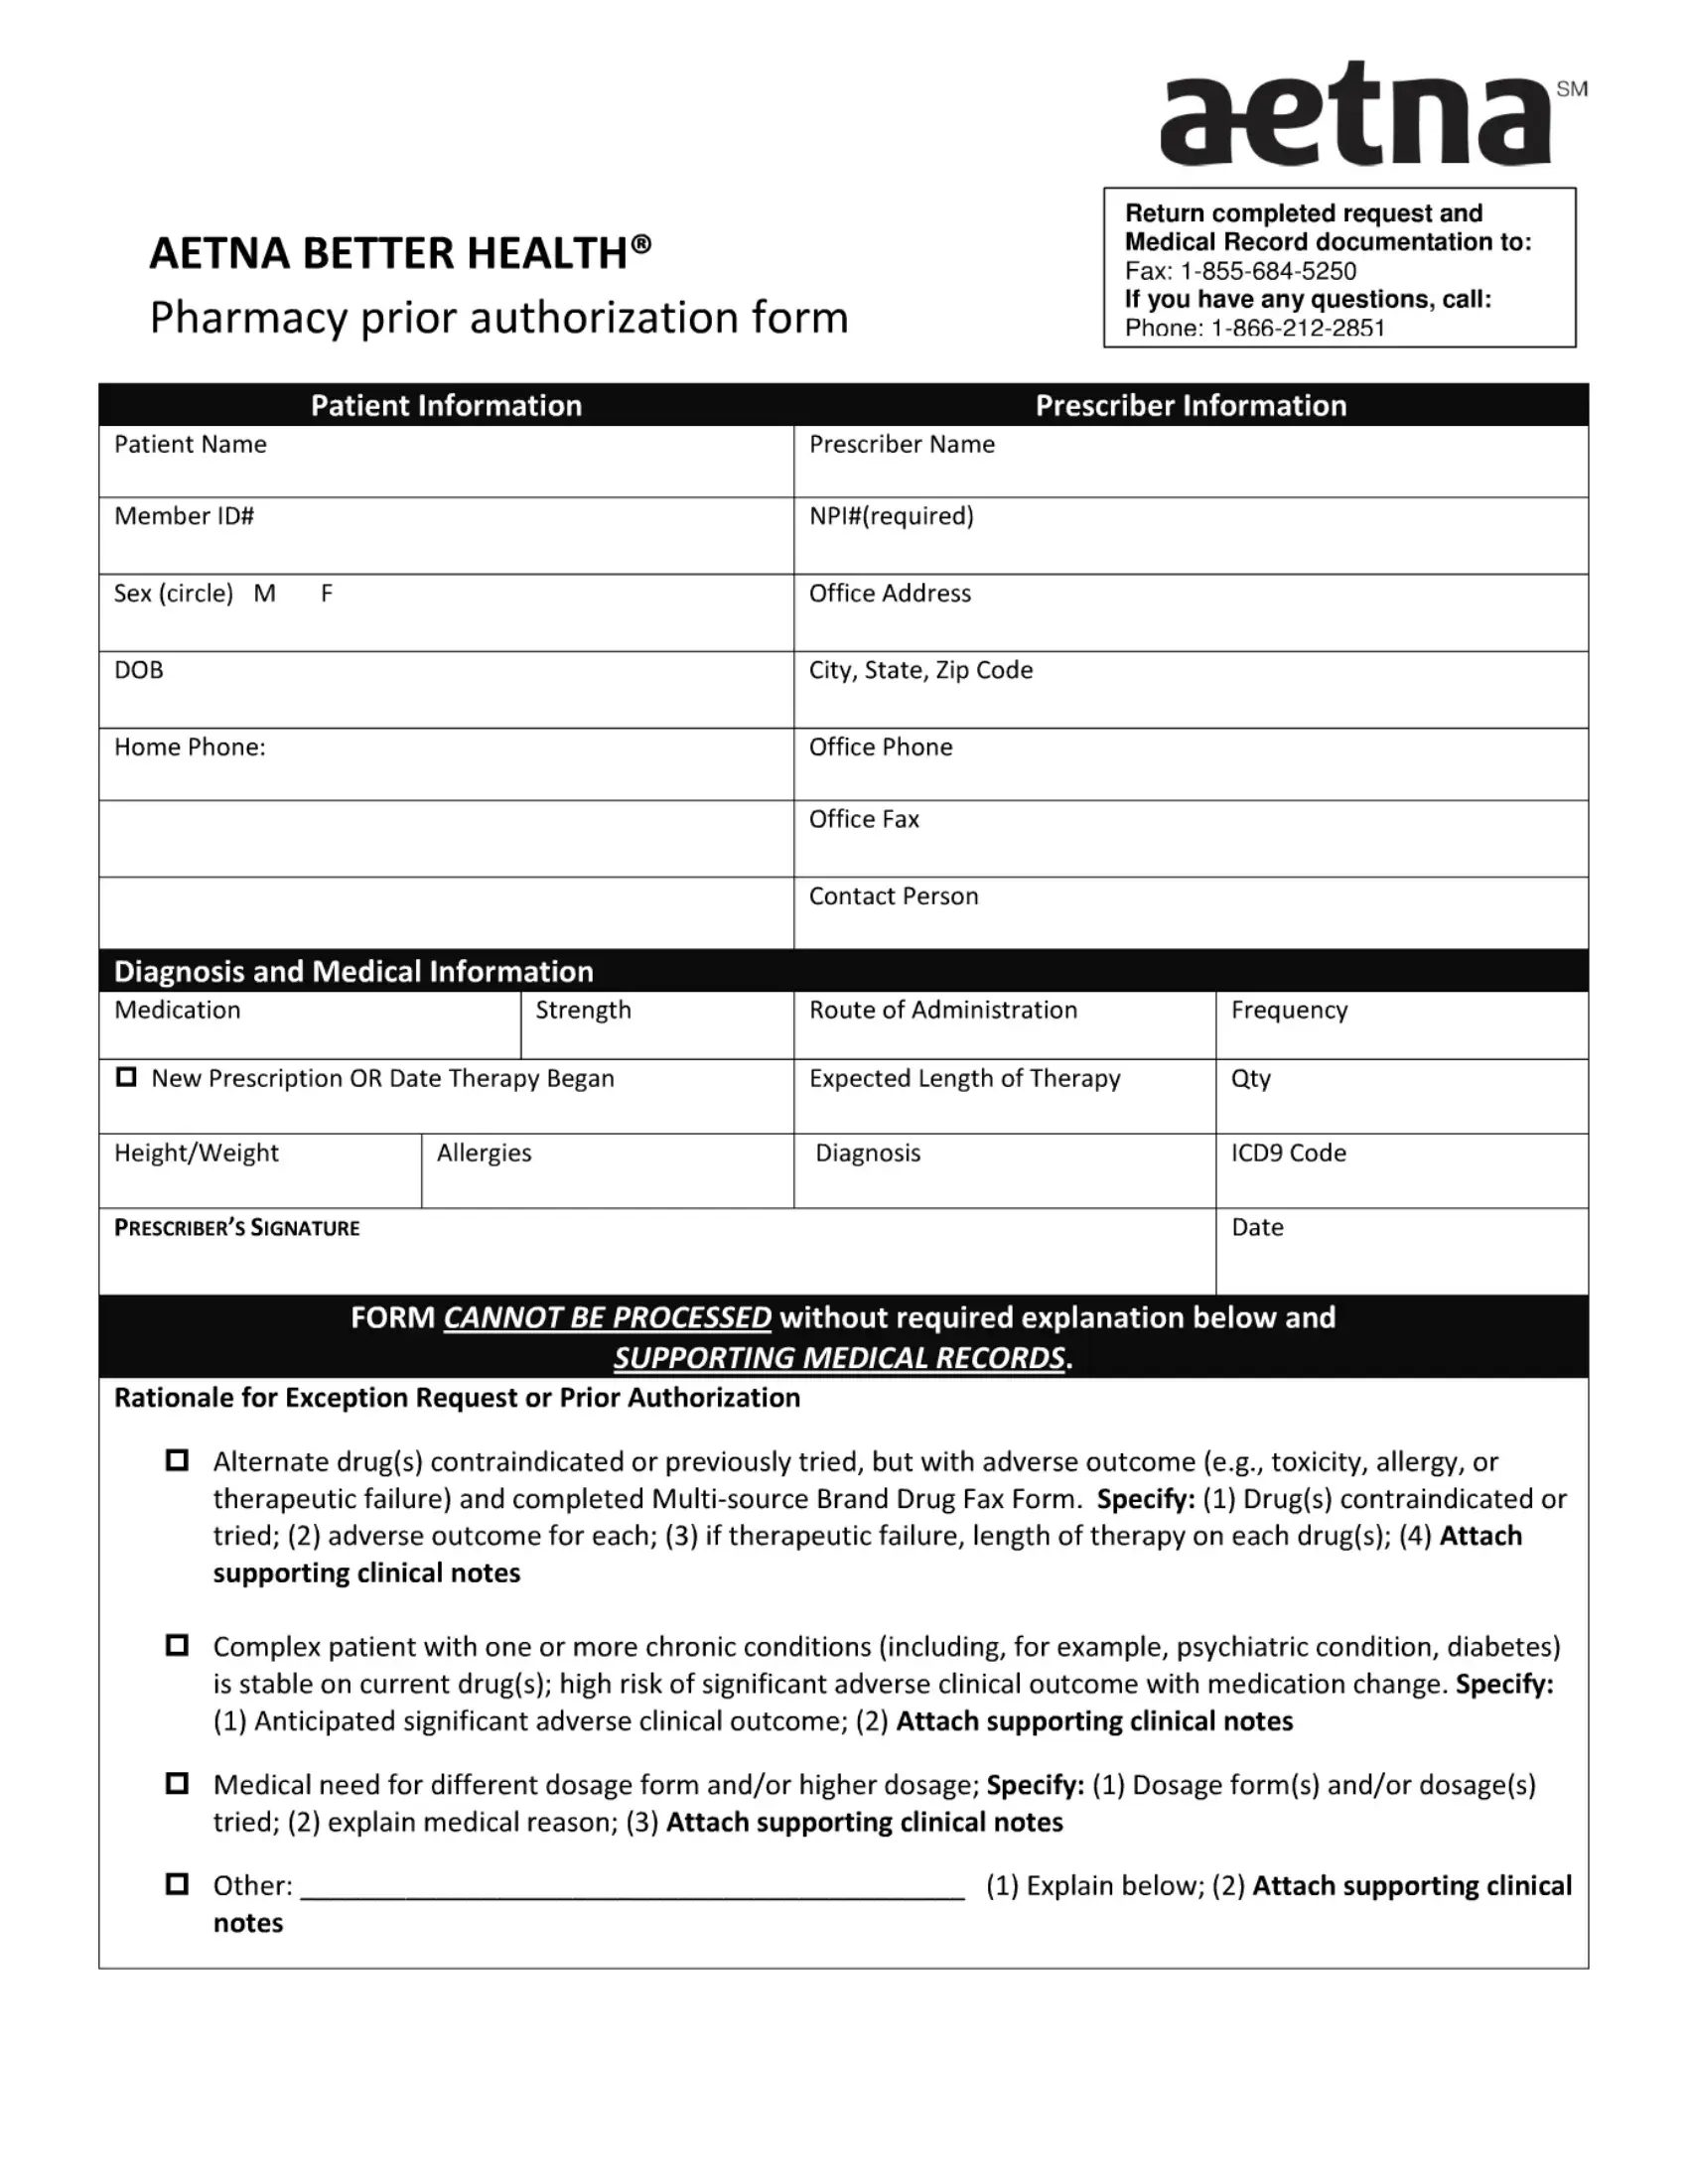 bcbs-prior-authorization-pdf-2009-2024-form-fill-out-and-sign